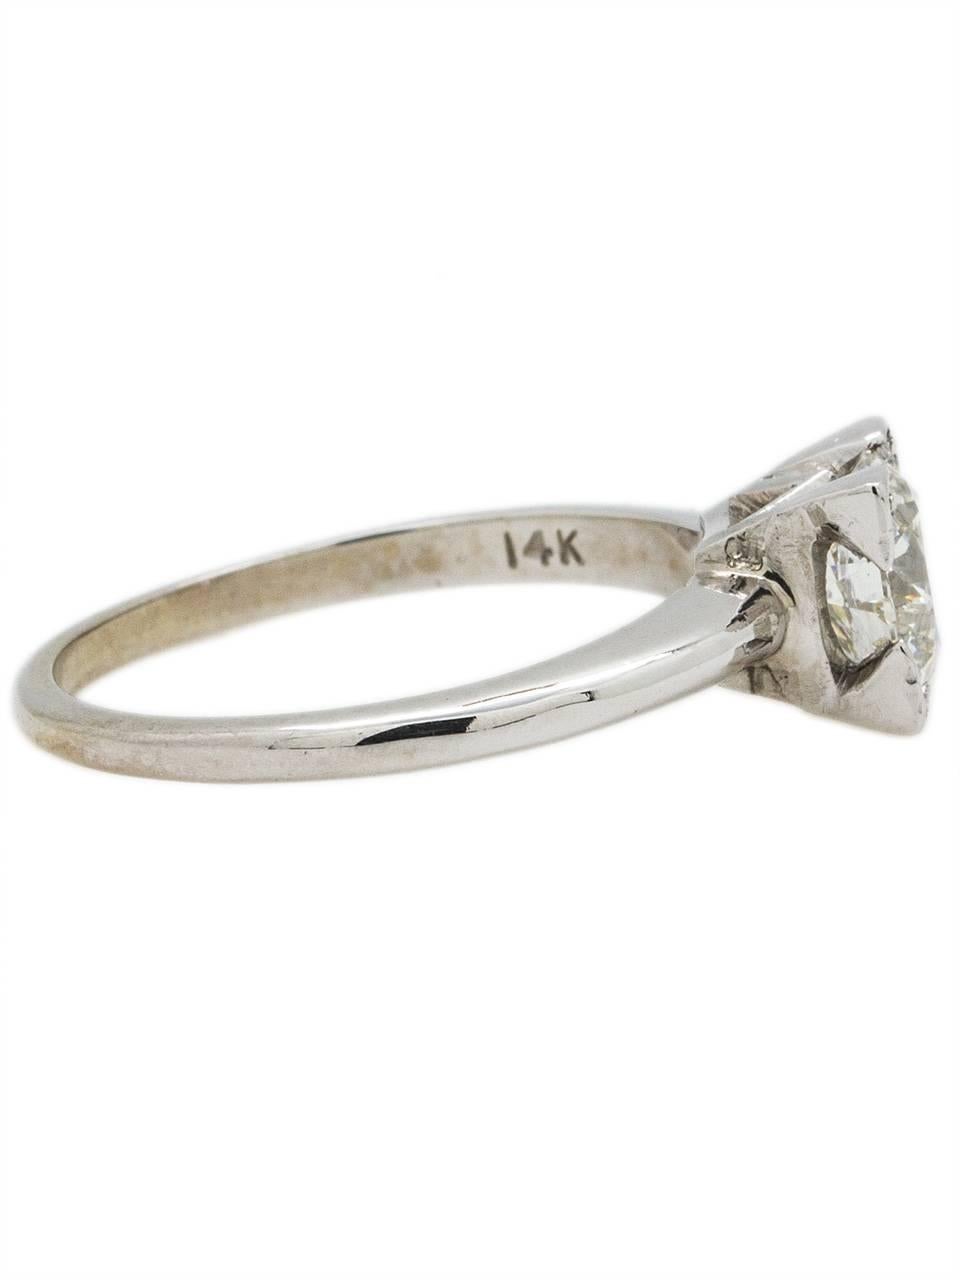 This classic 1950's 14K white gold engagement ring is set with a stunningly bright EGL certified 1.23ct Transitional Cut round diamond, G-SI2. The center stone is flanked by two bar set straight baguettes and two bead set full cut round side